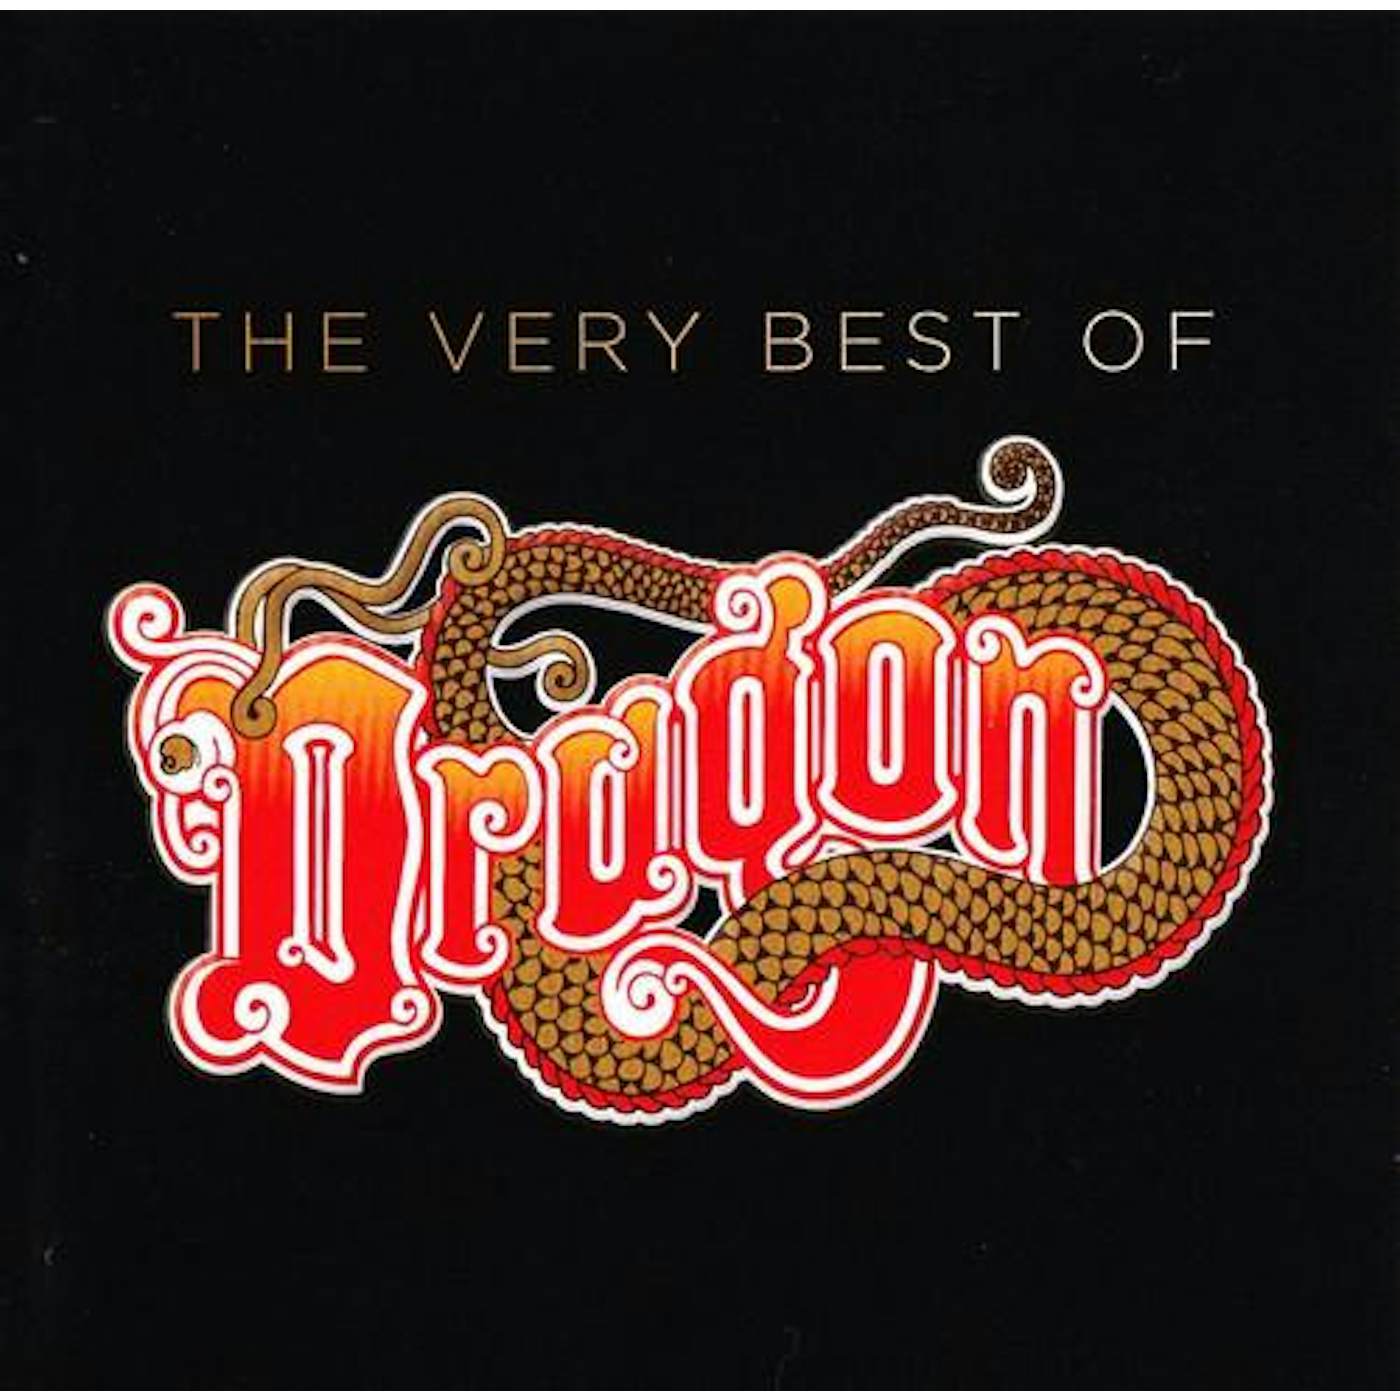 VERY BEST OF DRAGON (GOLD SERIES) CD